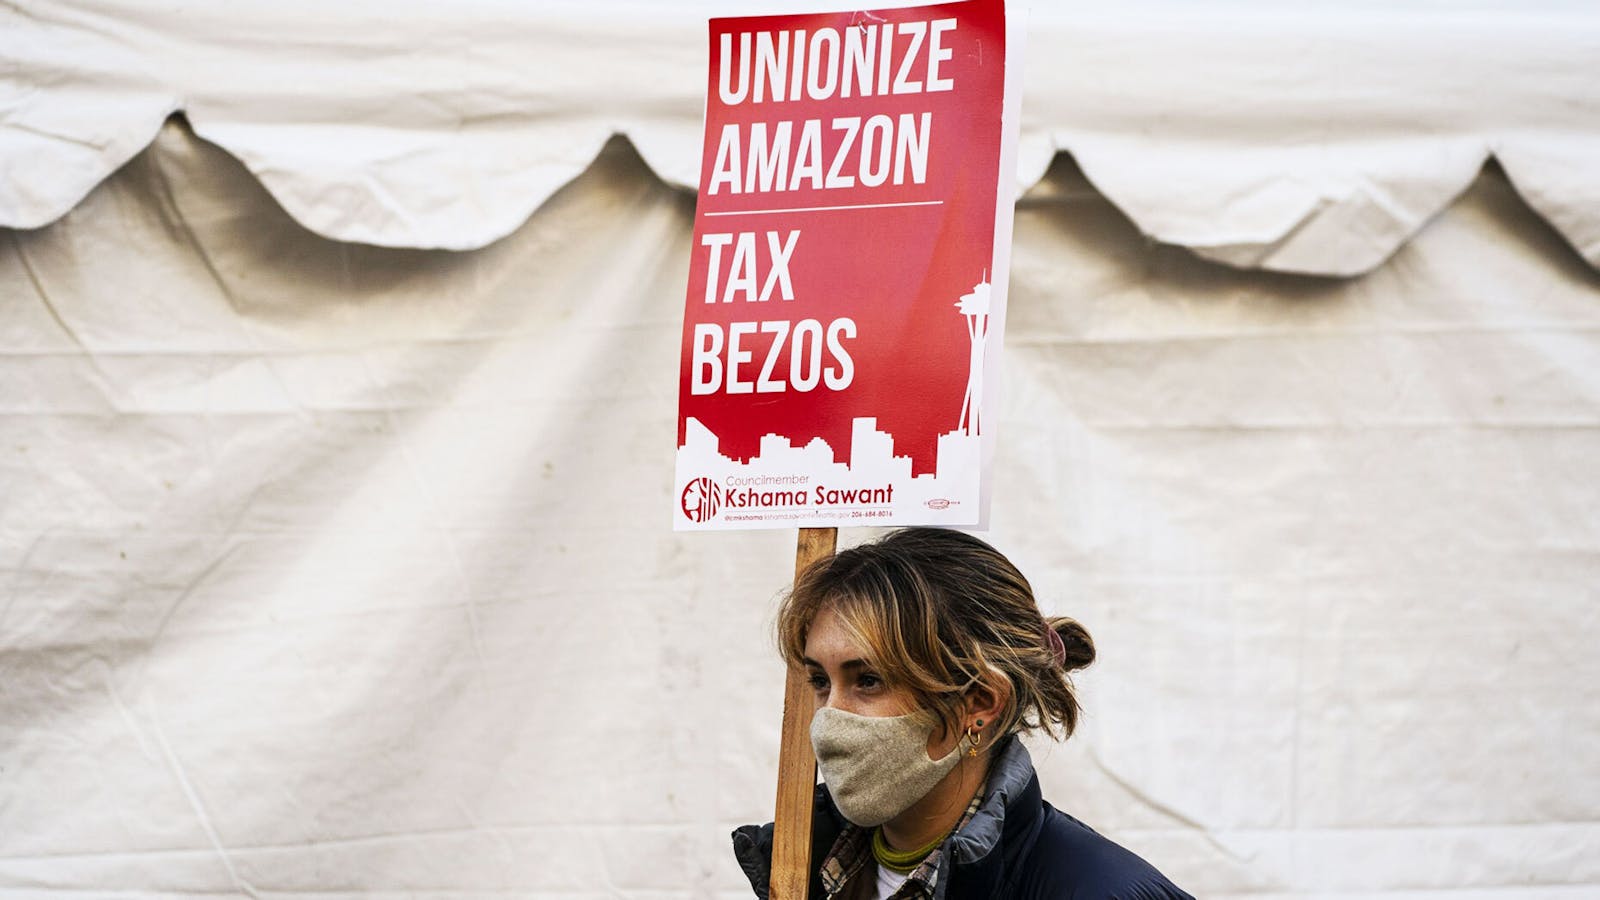 A demonstrator protesting outside Amazon's headquarters in Seattle in November. Photo by Bloomberg